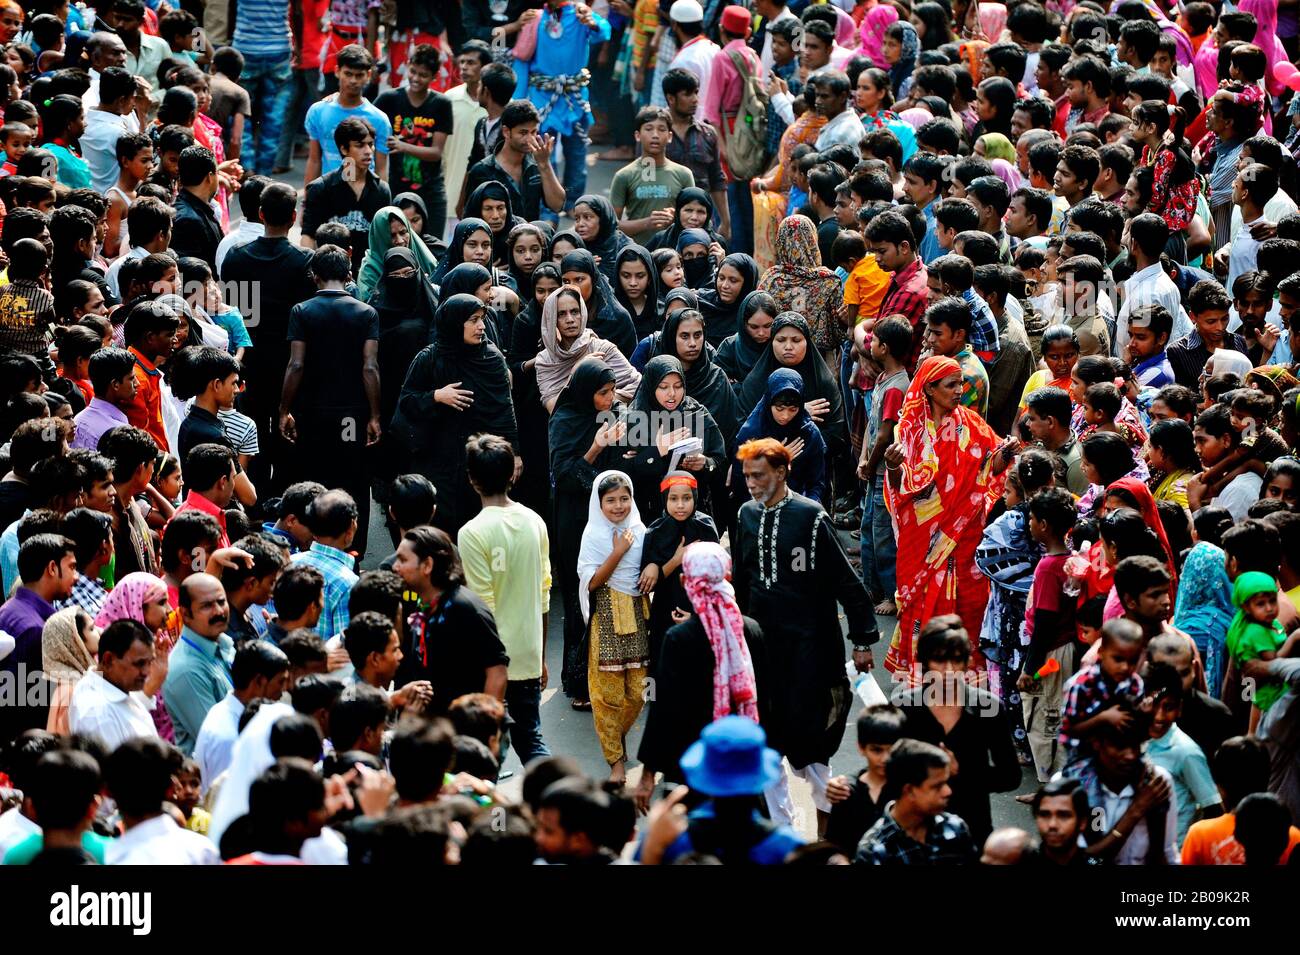 Thousands of Shia Muslims carryout a mourning procession of the holy Ashura on the 10th day of the holy month of Muharram. Ashura marks the martyrdom of Hazrat Imam Hassan and Hussain the grand sons of Prophet Muhammad, who were killed in a battle. Dhaka, Bangladesh. December 6, 2011. Stock Photo